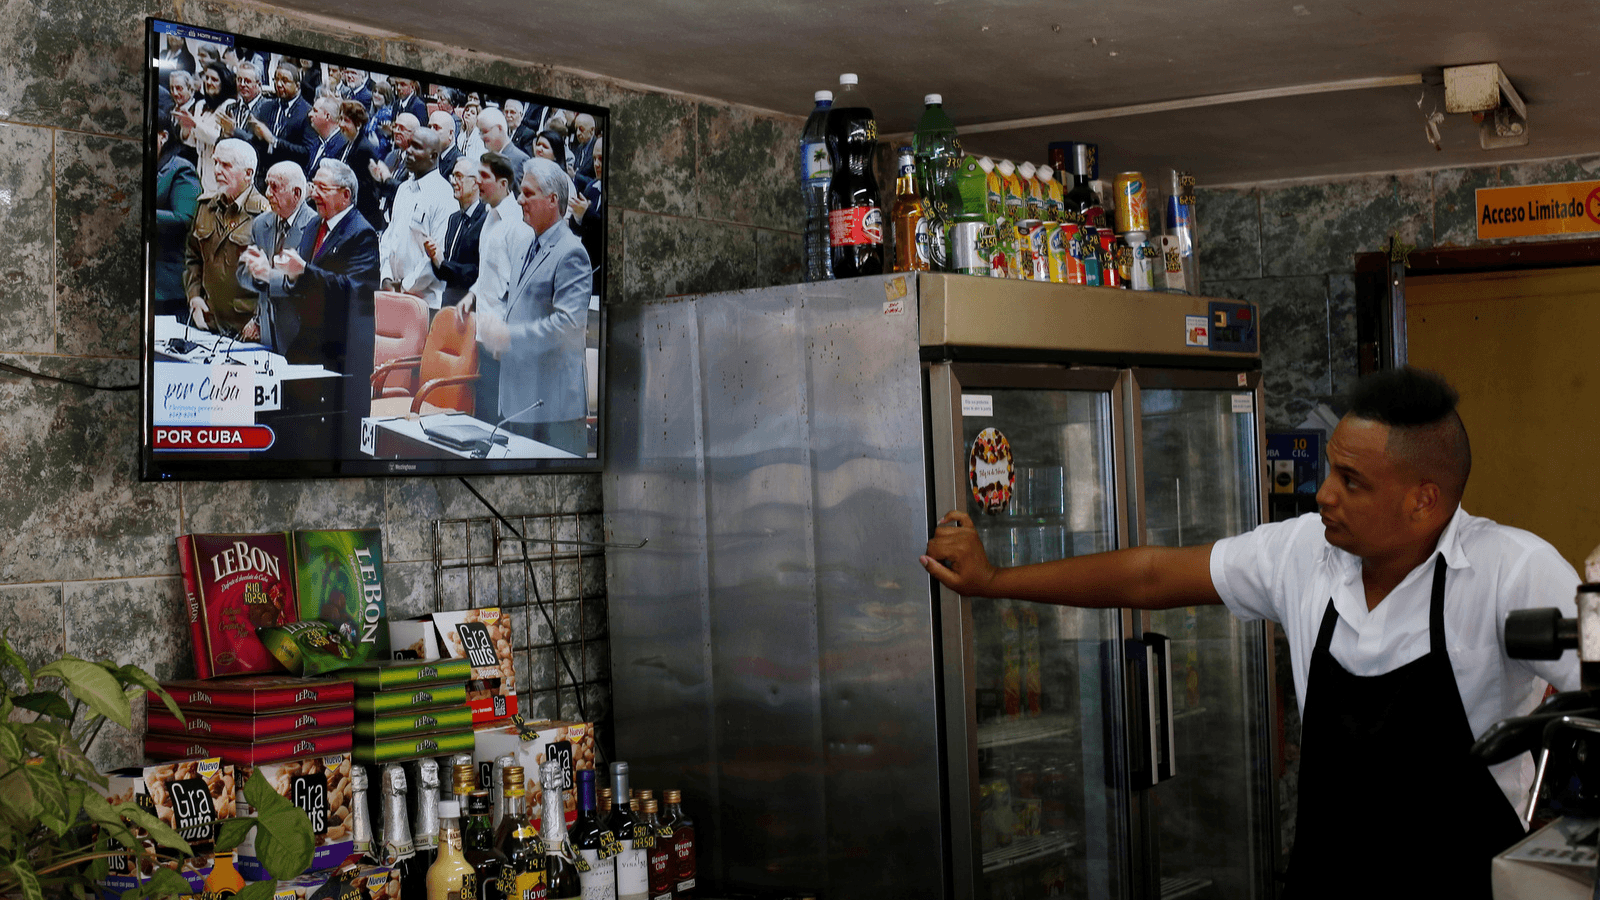 Cuba's President Raul Castro (C) and First Vice-President Miguel Díaz-Canel (R) are seen on a TV screen inside a restaurant during a session of the National Assembly in Havana, Cuba, April 18, 2018. Díaz-Canel became Cuba's president on Wednesday. 